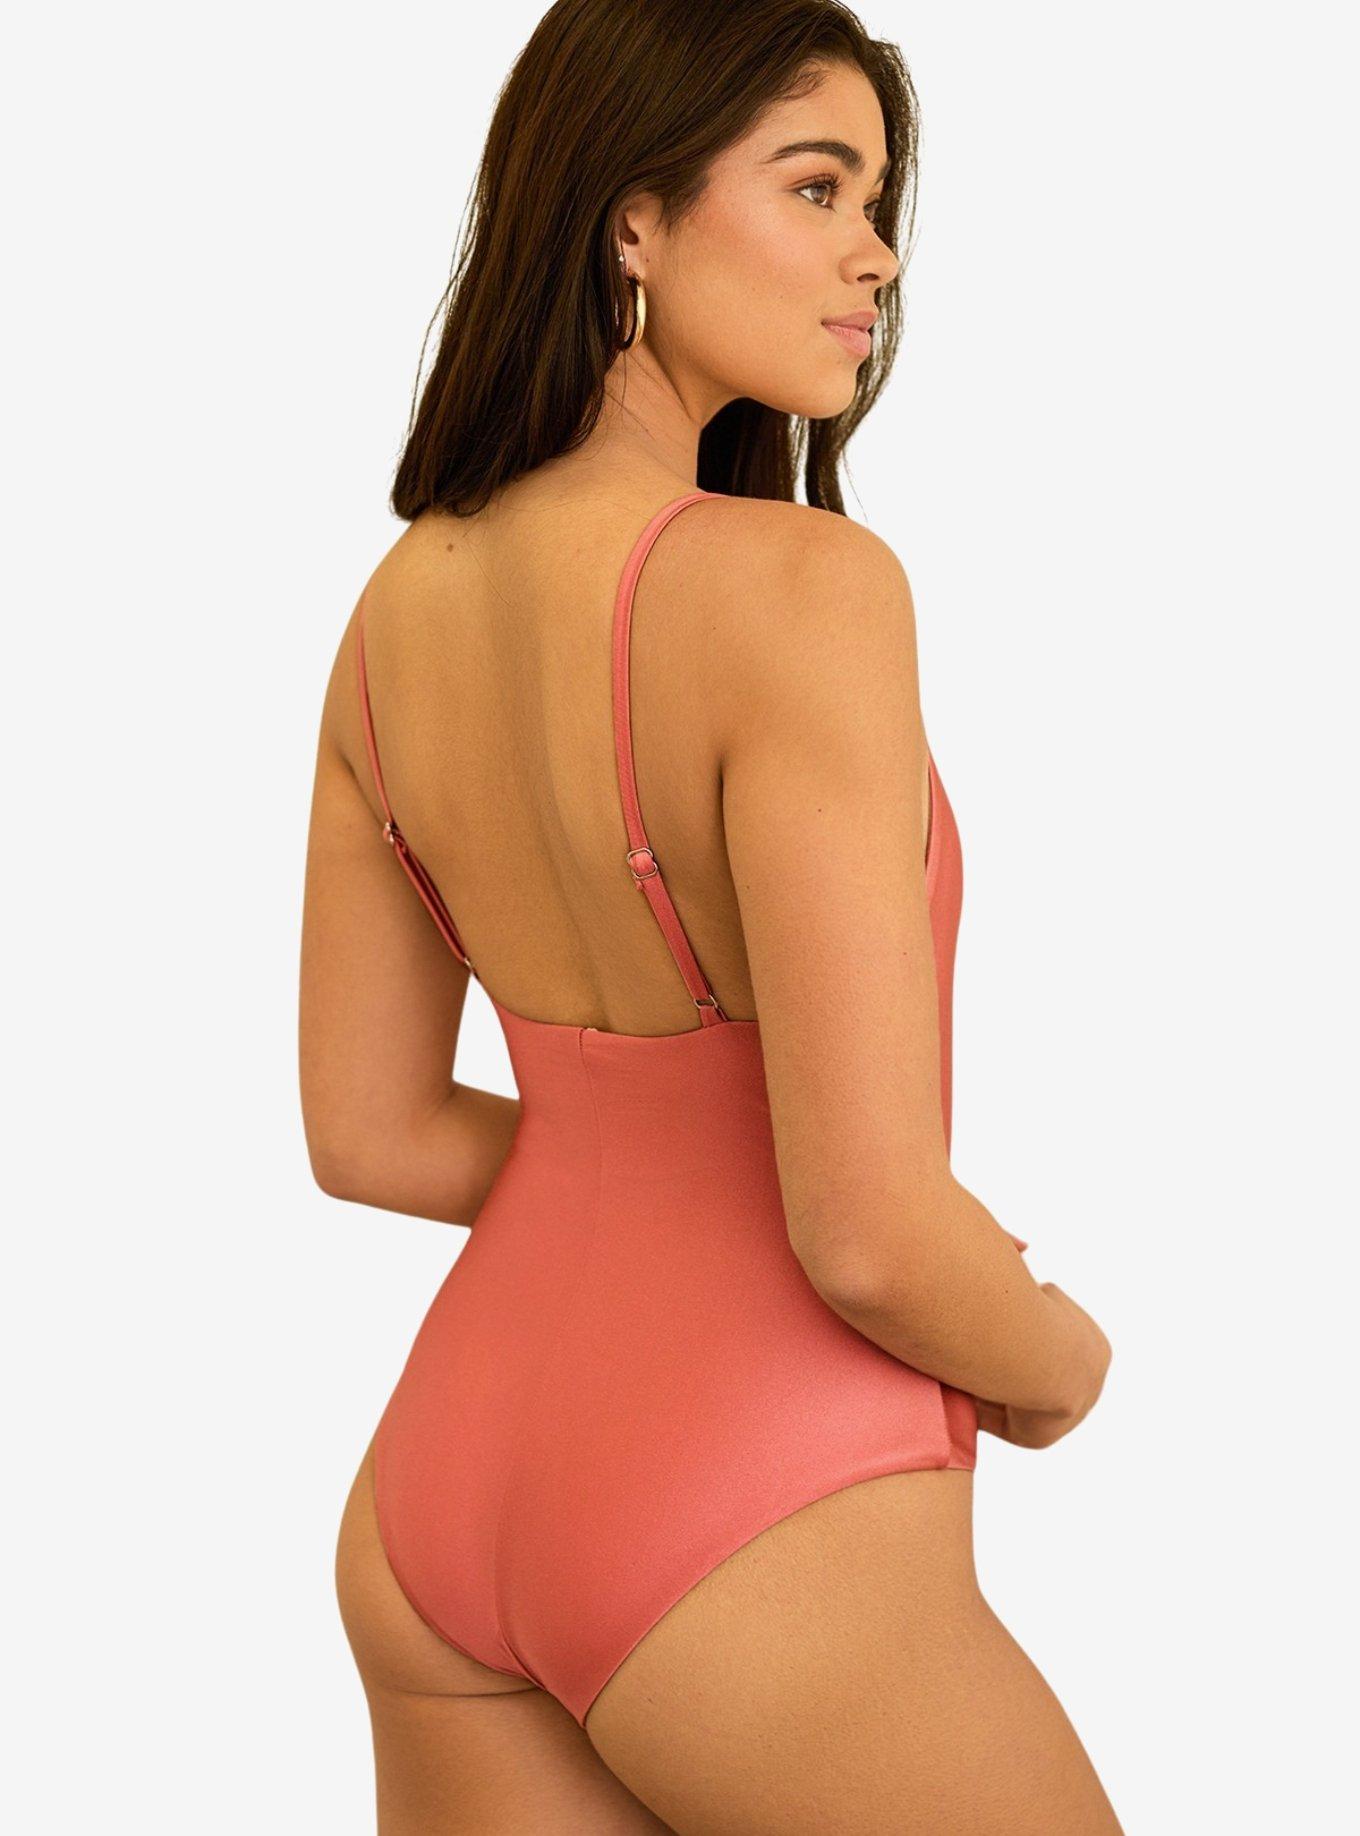 Dippin' Daisy's Bliss Moderate Coverage Swim One Piece Dusty Rose, DUSTY ROSE, alternate